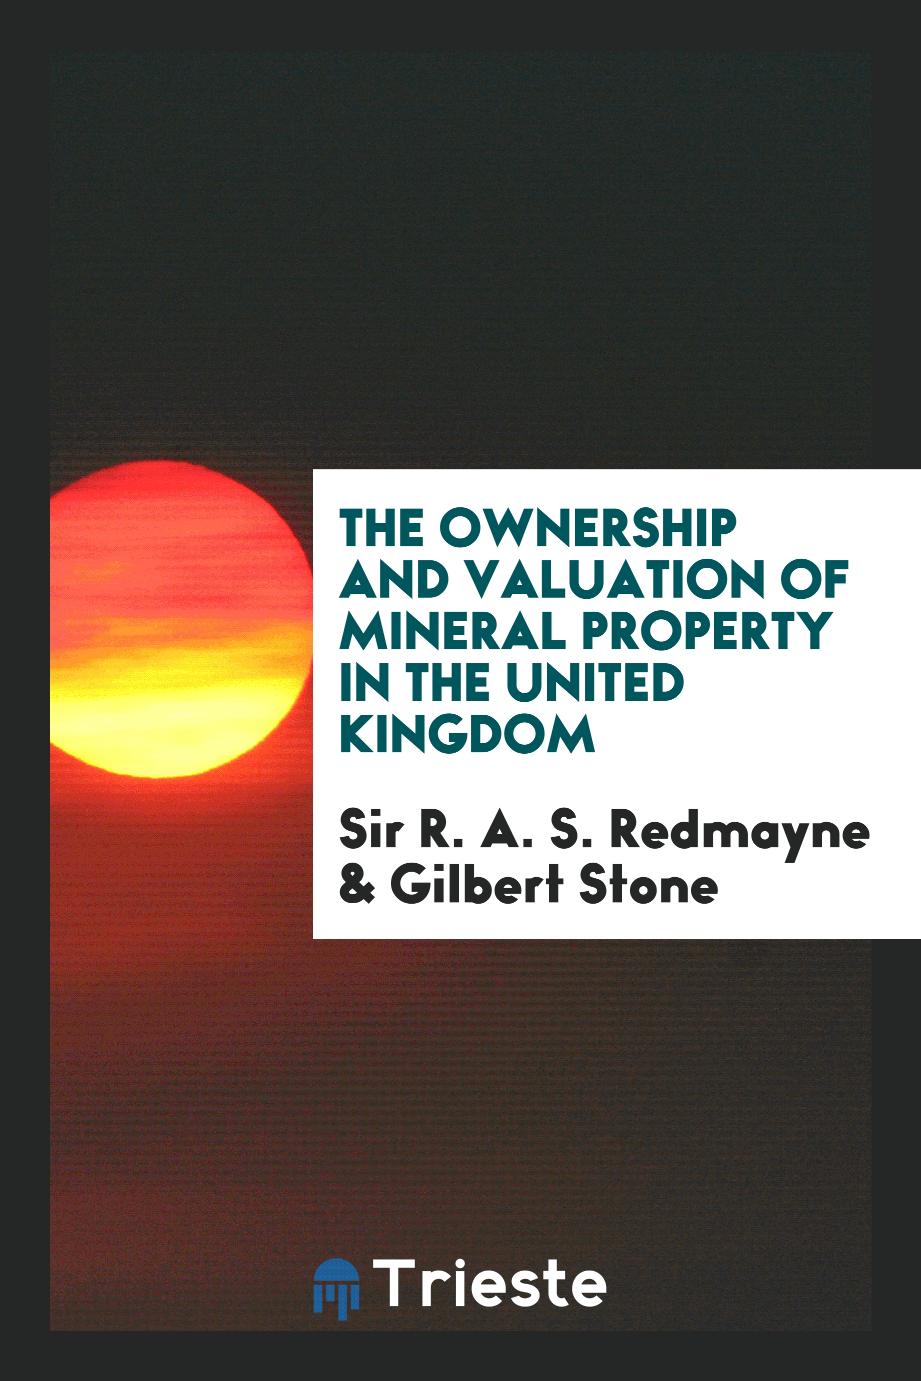 The ownership and valuation of mineral property in the United Kingdom